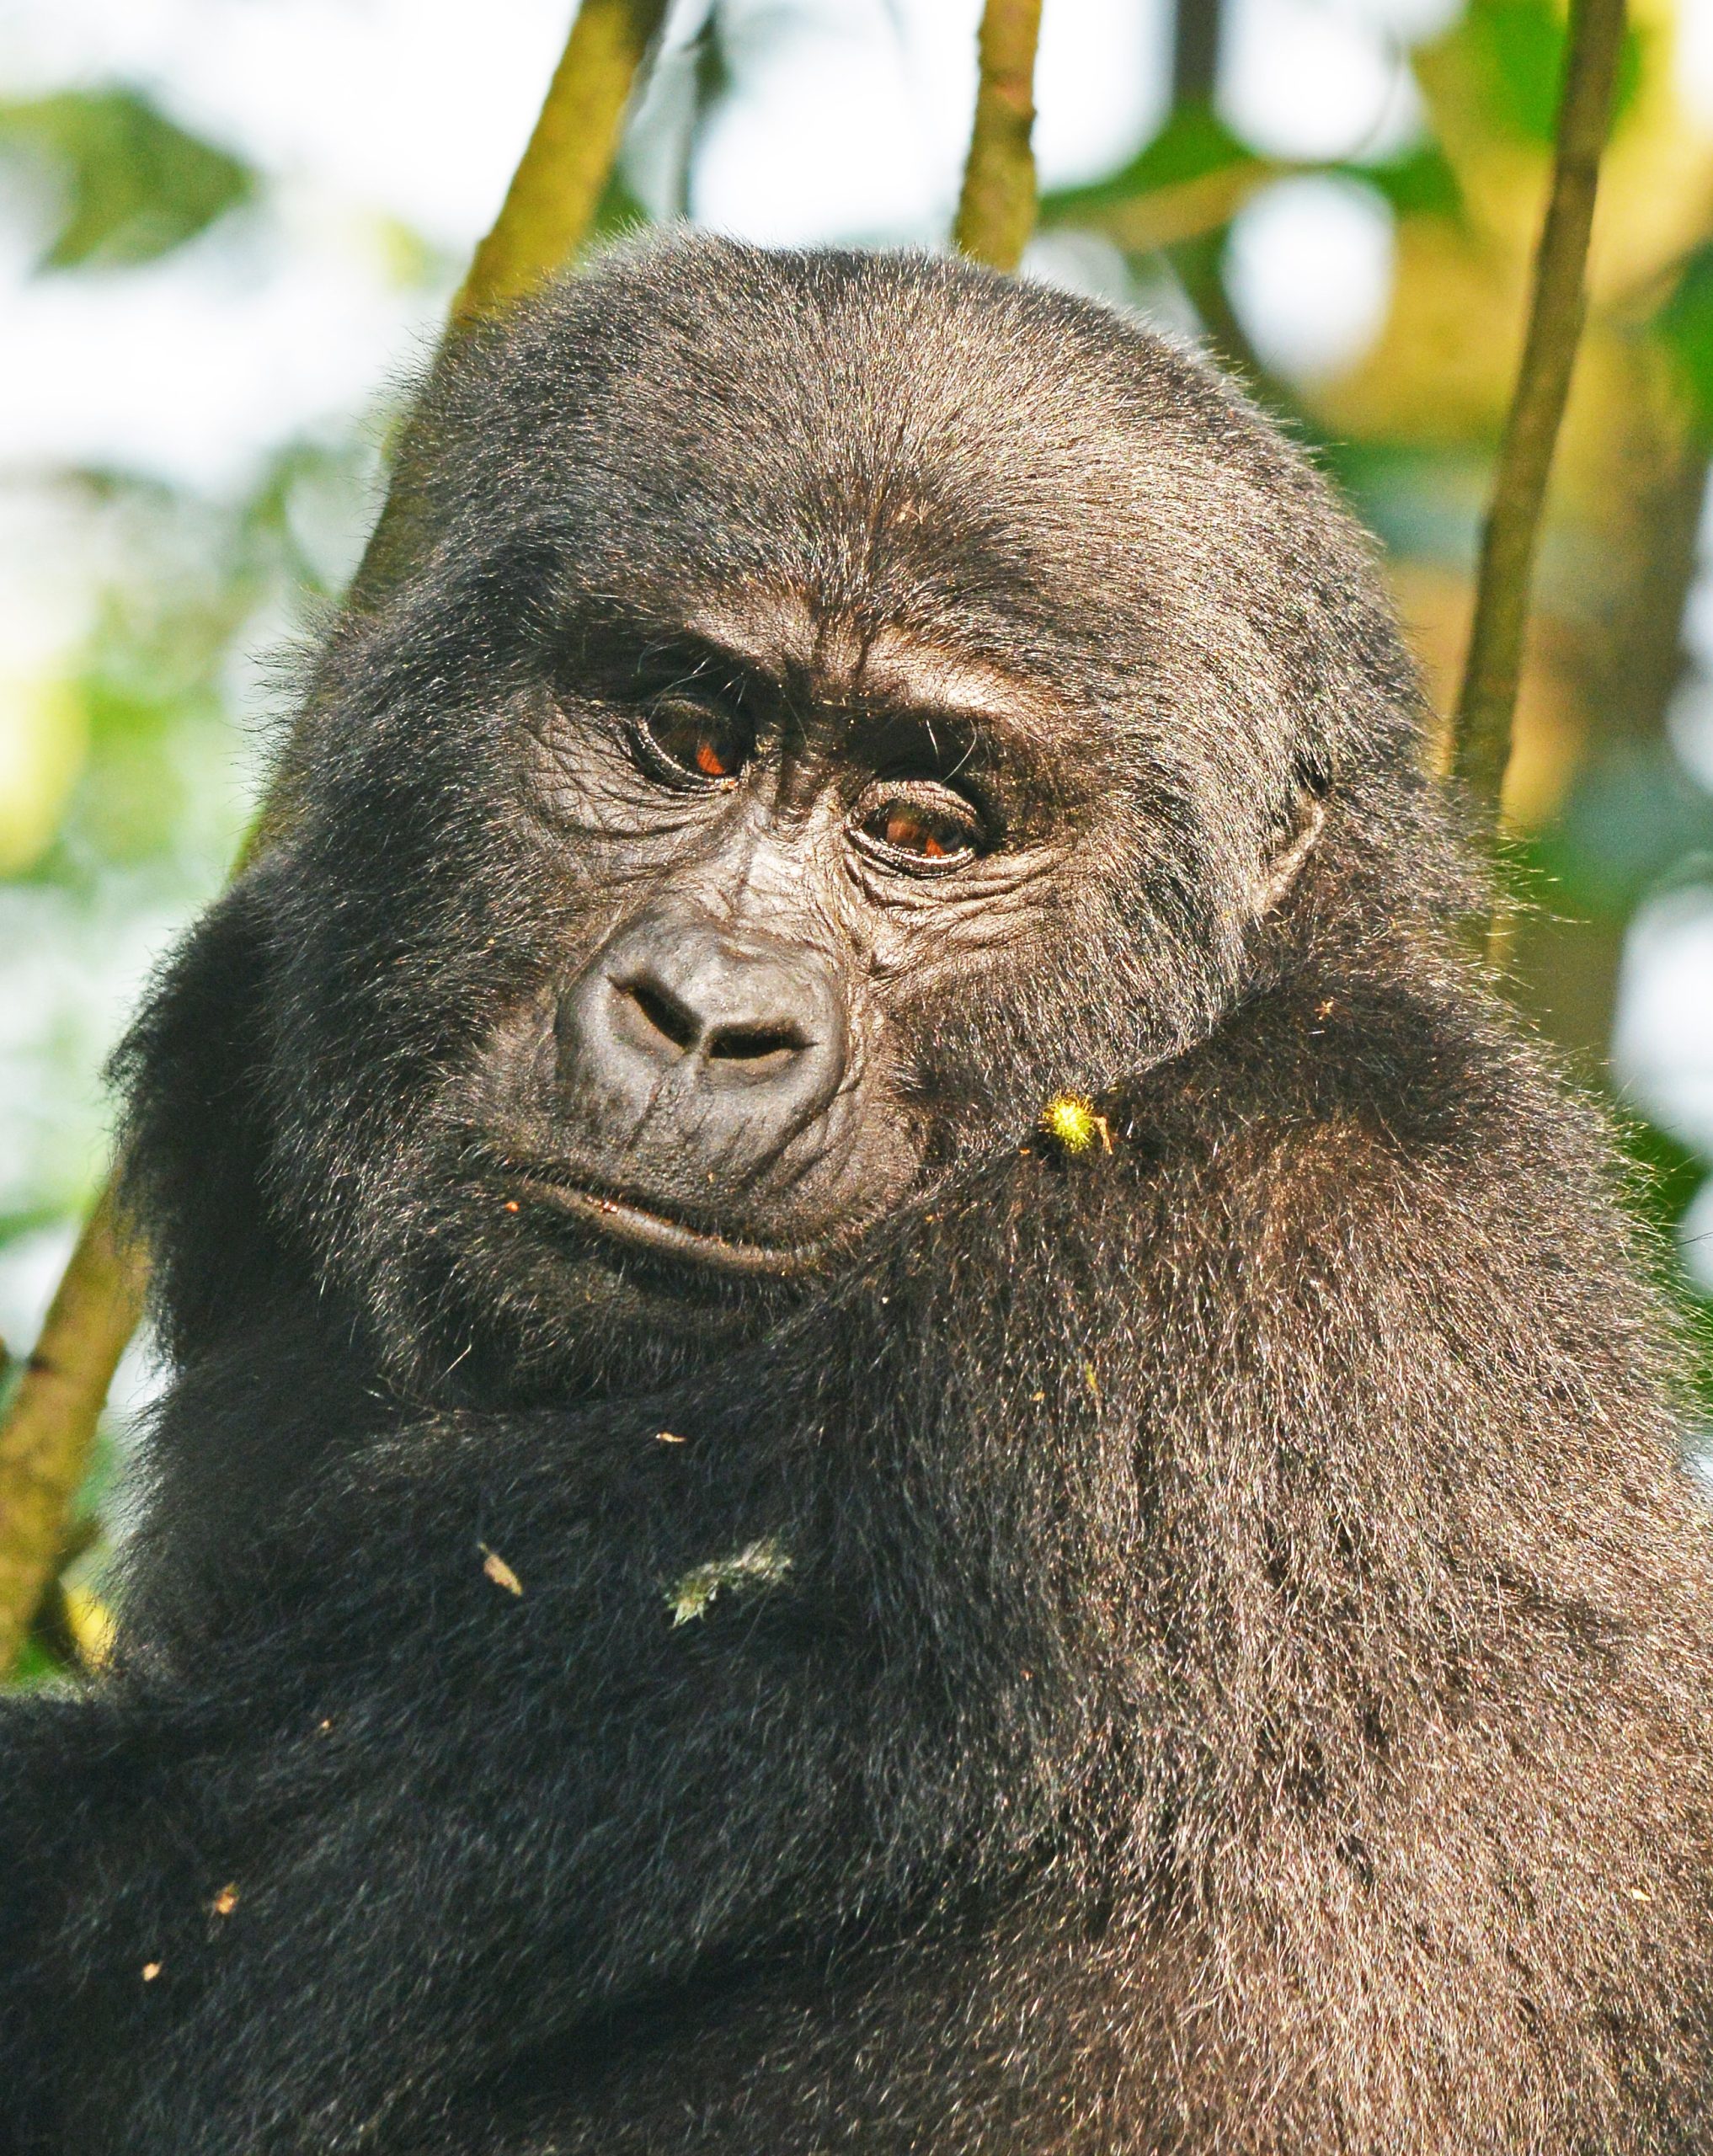 How to get to Bwindi impenetrable forest National park